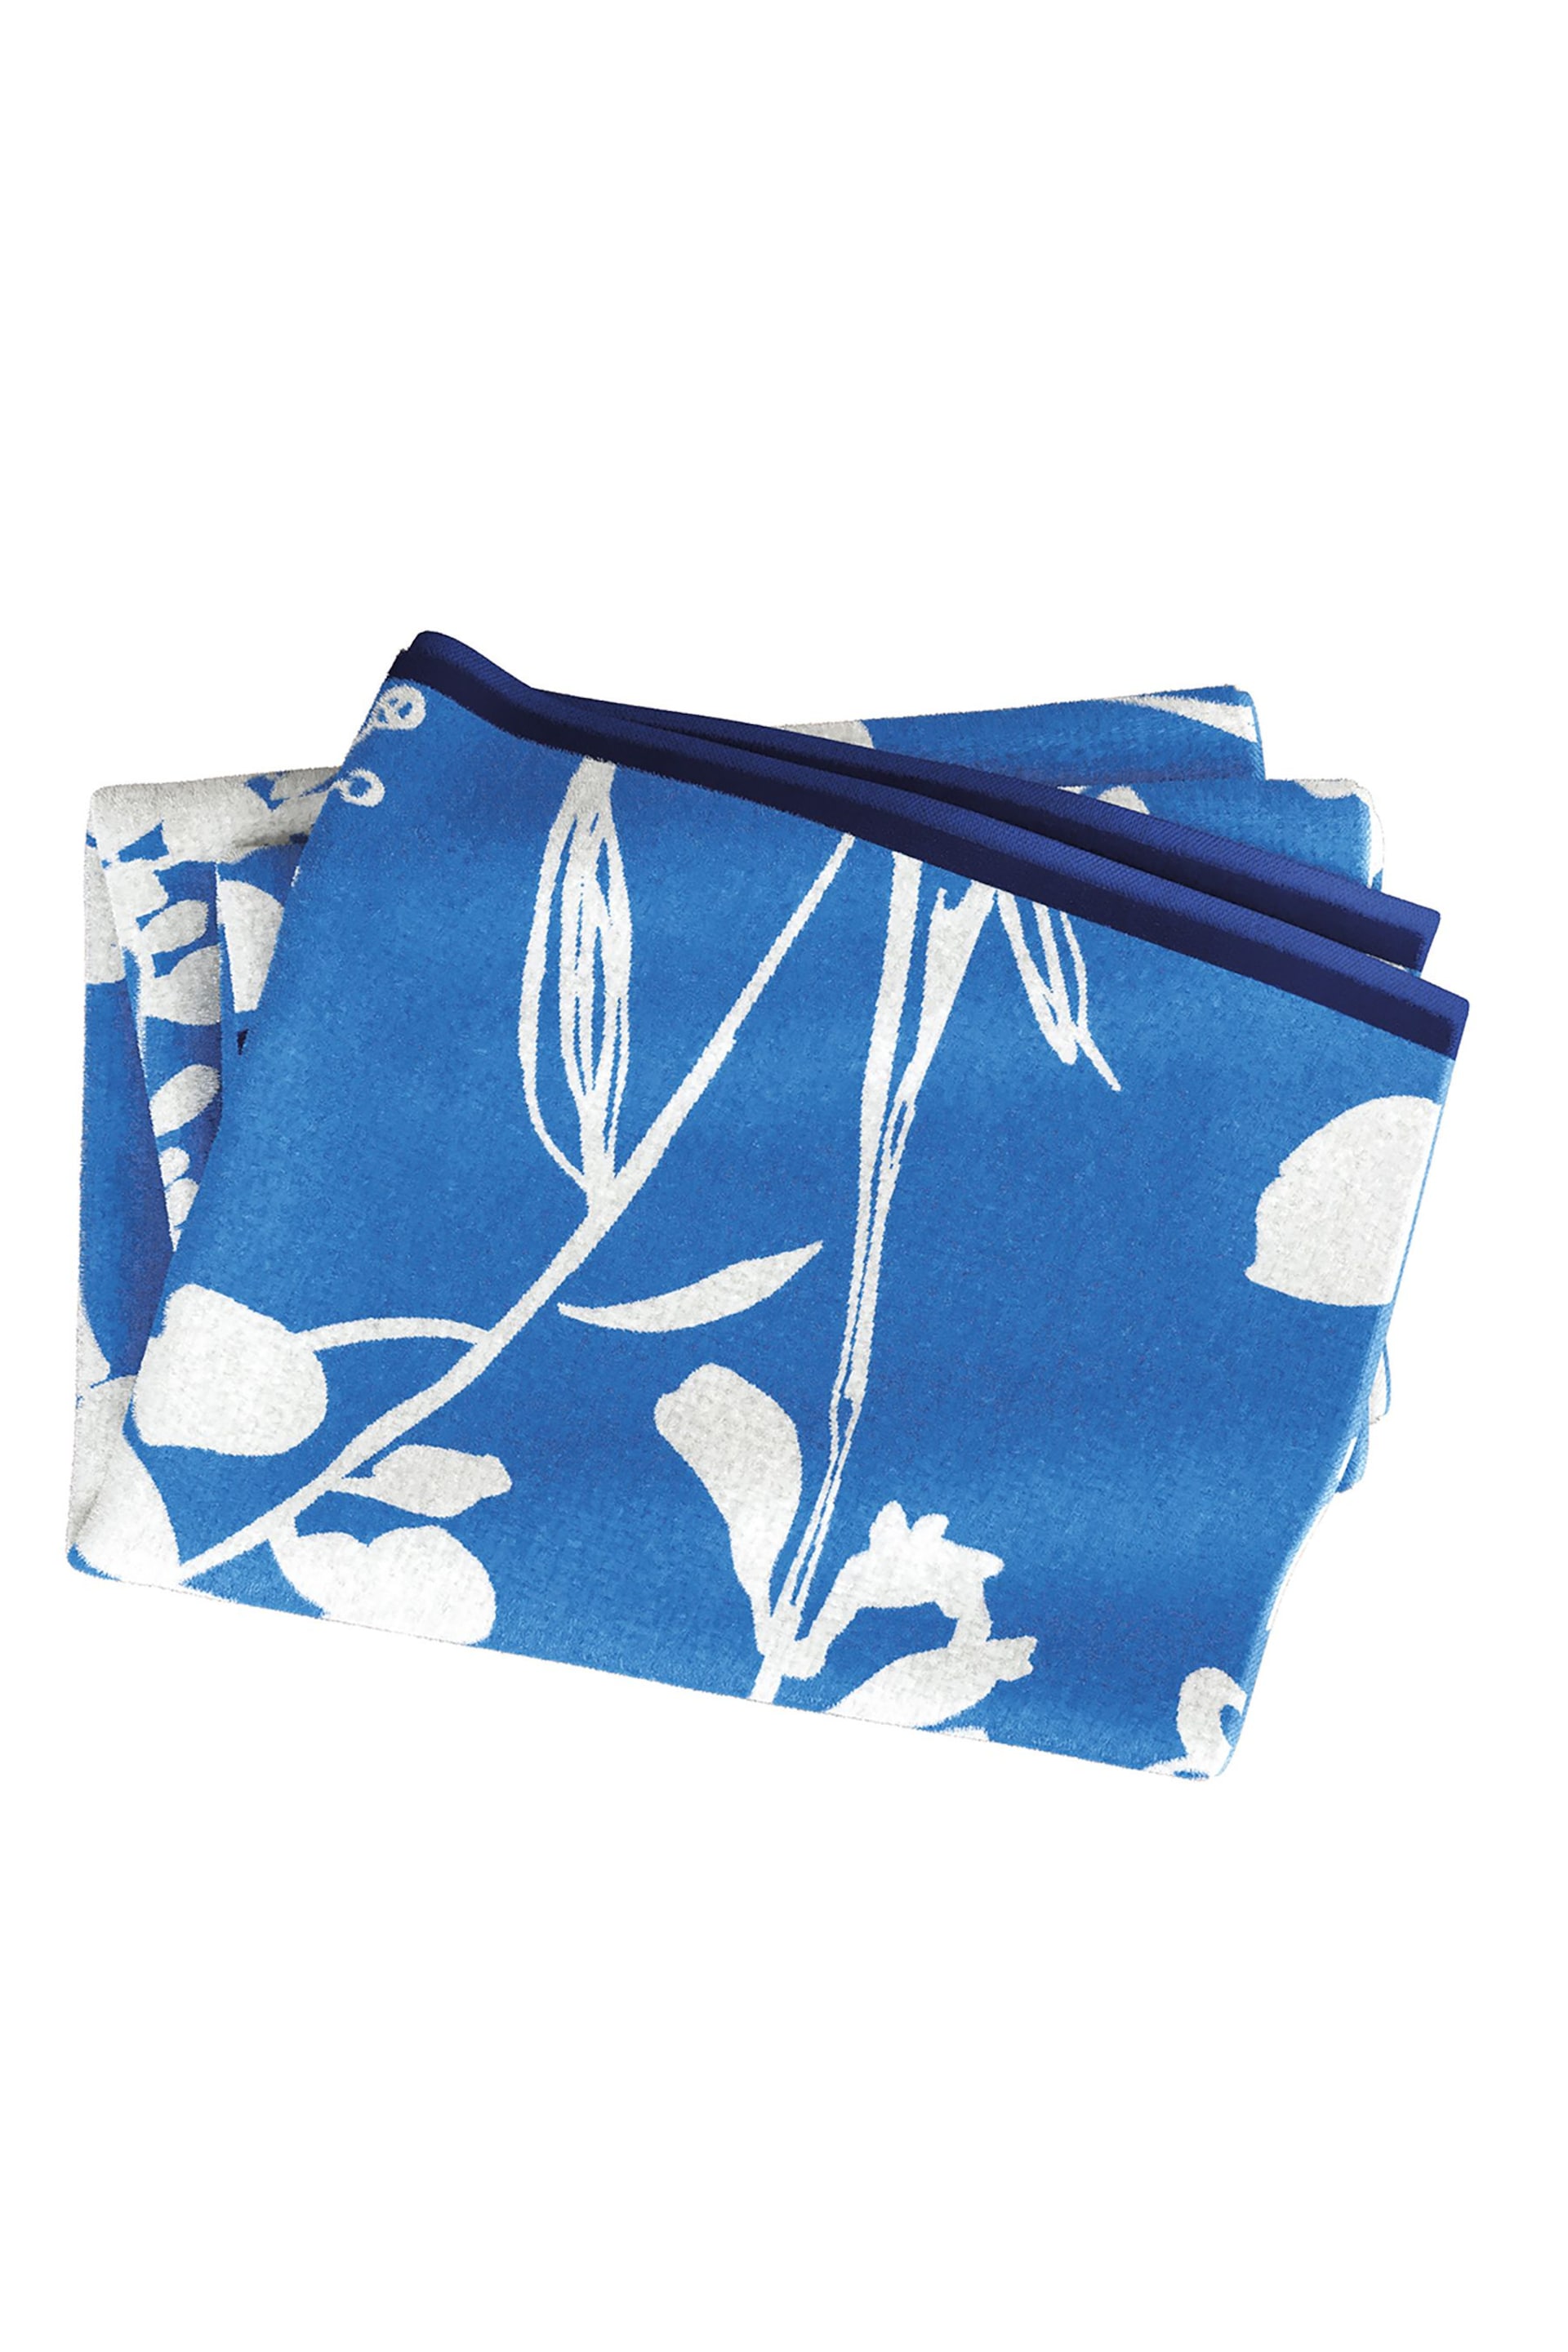 Helena Springfield Set of 2 Blue Willow Hand Towels - Image 2 of 3